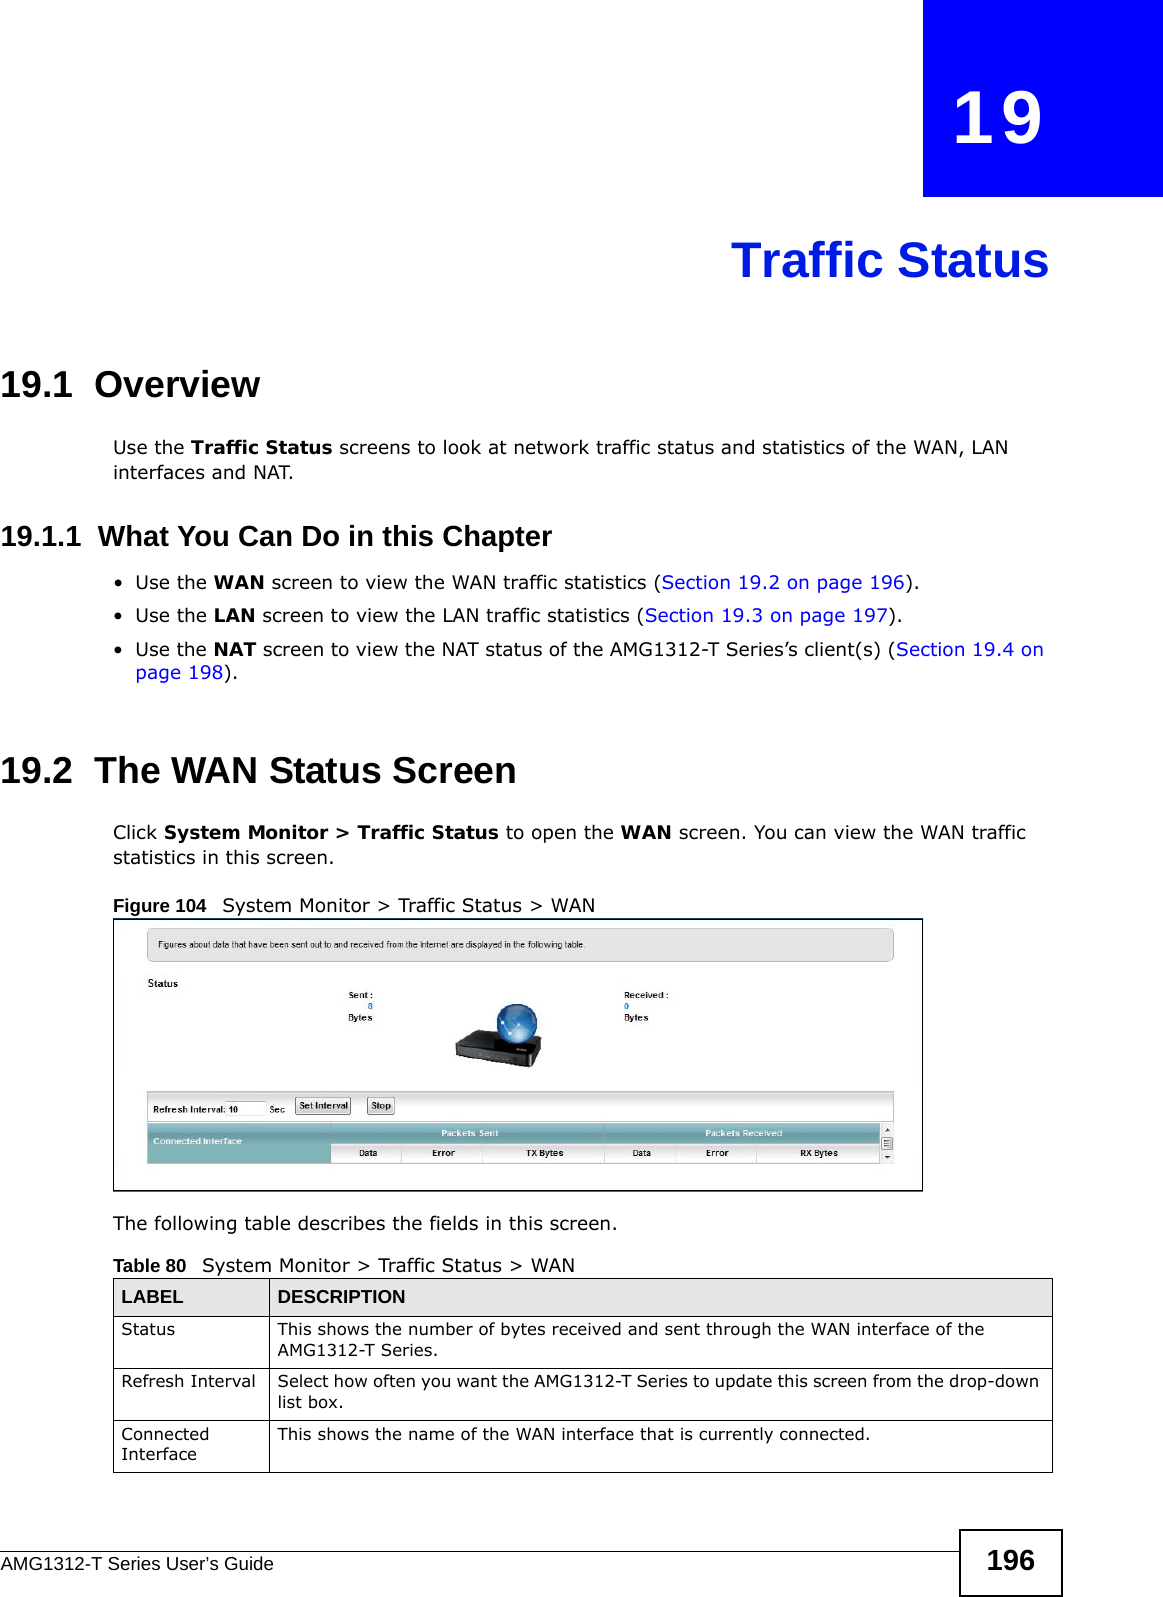 AMG1312-T Series User’s Guide 196CHAPTER   19Traffic Status19.1  OverviewUse the Traffic Status screens to look at network traffic status and statistics of the WAN, LAN interfaces and NAT. 19.1.1  What You Can Do in this Chapter•Use the WAN screen to view the WAN traffic statistics (Section 19.2 on page 196).•Use the LAN screen to view the LAN traffic statistics (Section 19.3 on page 197).•Use the NAT screen to view the NAT status of the AMG1312-T Series’s client(s) (Section 19.4 on page 198).19.2  The WAN Status Screen Click System Monitor &gt; Traffic Status to open the WAN screen. You can view the WAN traffic statistics in this screen.Figure 104   System Monitor &gt; Traffic Status &gt; WANThe following table describes the fields in this screen.   Table 80   System Monitor &gt; Traffic Status &gt; WANLABEL DESCRIPTIONStatus This shows the number of bytes received and sent through the WAN interface of the AMG1312-T Series.Refresh Interval Select how often you want the AMG1312-T Series to update this screen from the drop-down list box.Connected Interface This shows the name of the WAN interface that is currently connected.